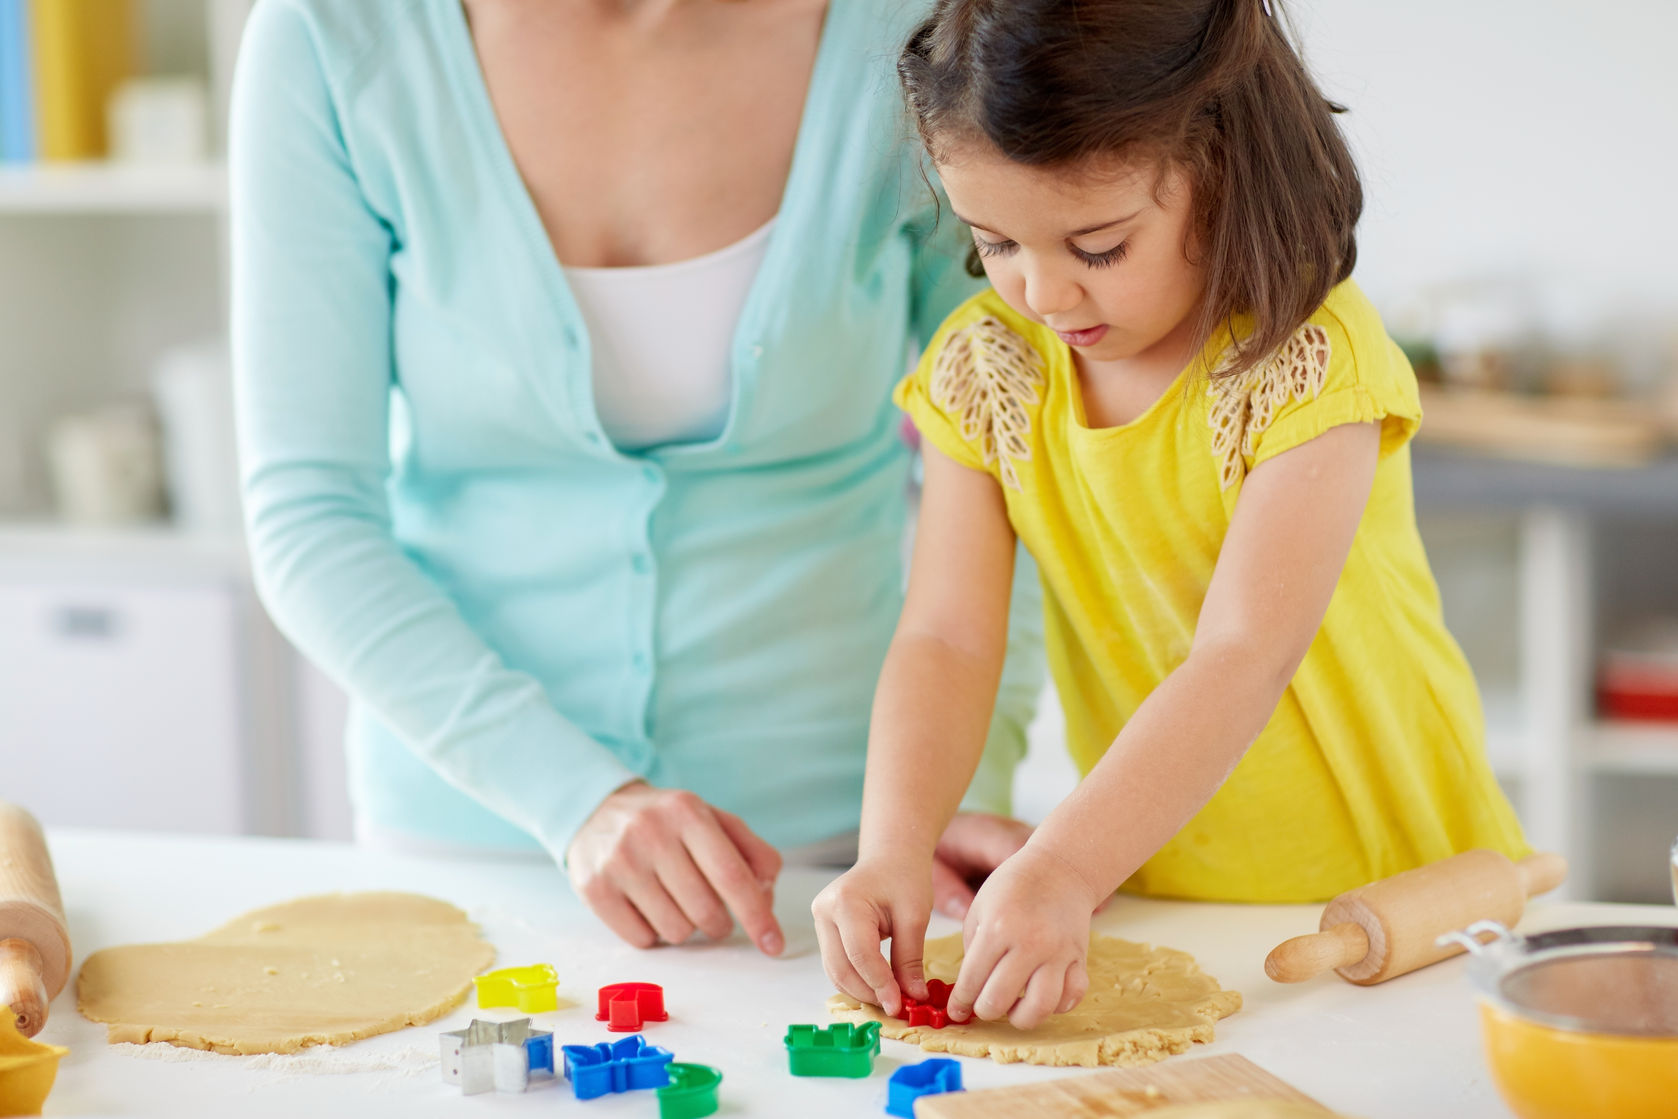 Numeracy Skills - Cooking with a child can help improve measuring and counting skills